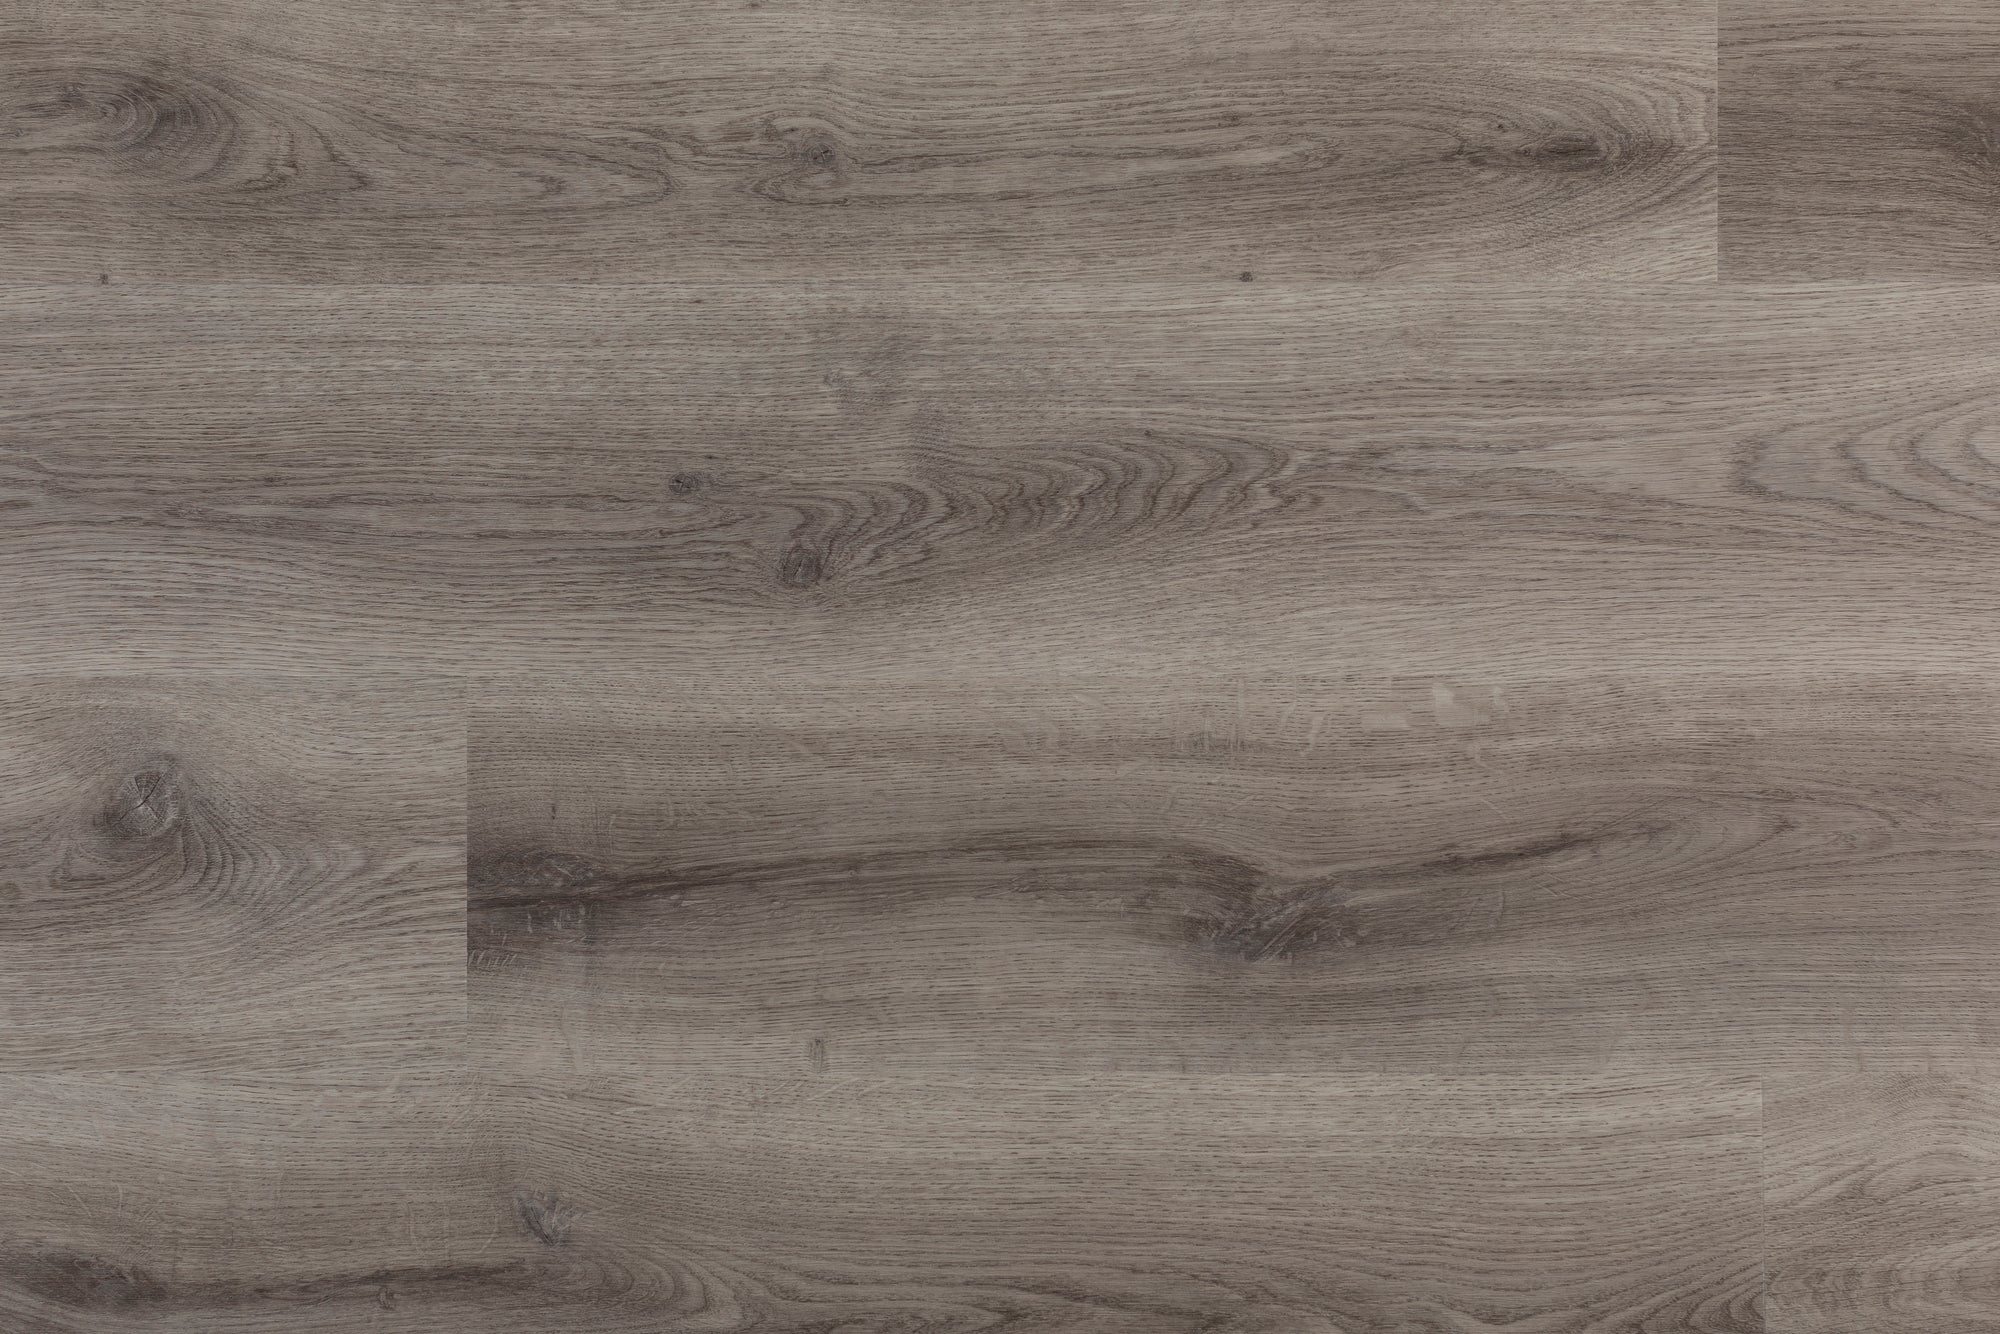 Edson Maverick engineered hardwood floor from our Free sample collection